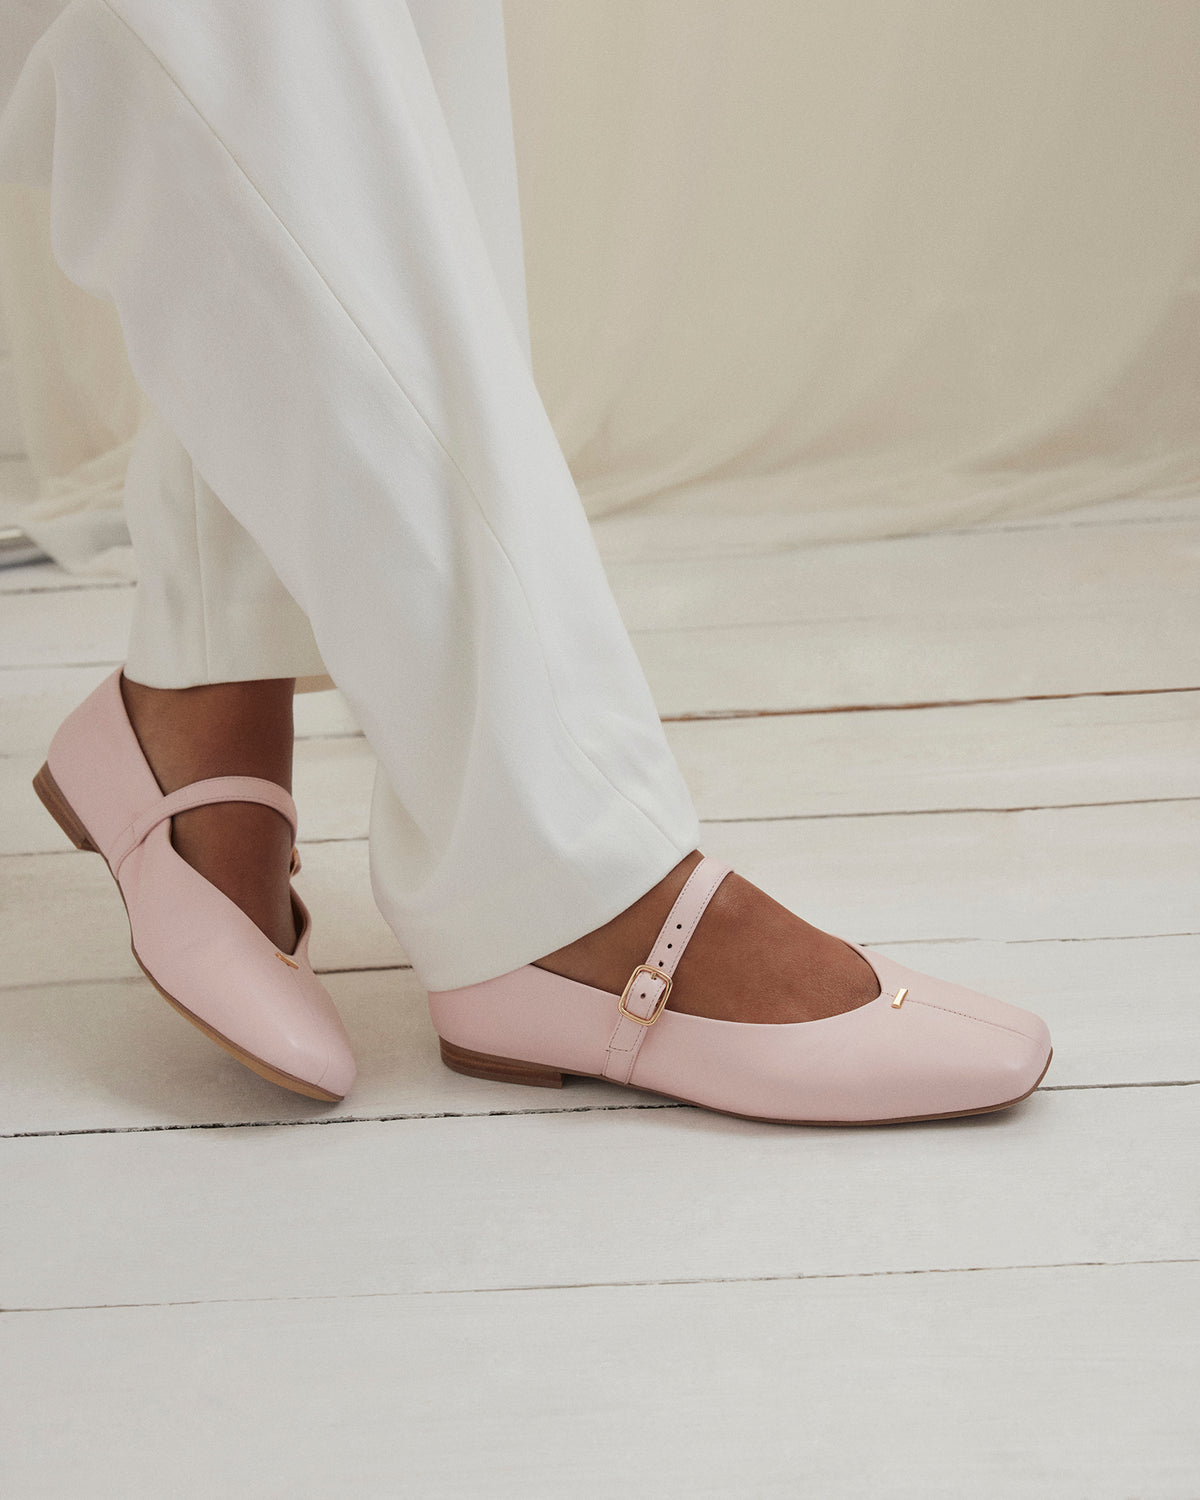 APRIL CASUAL FLATS SOFT PINK LEATHER